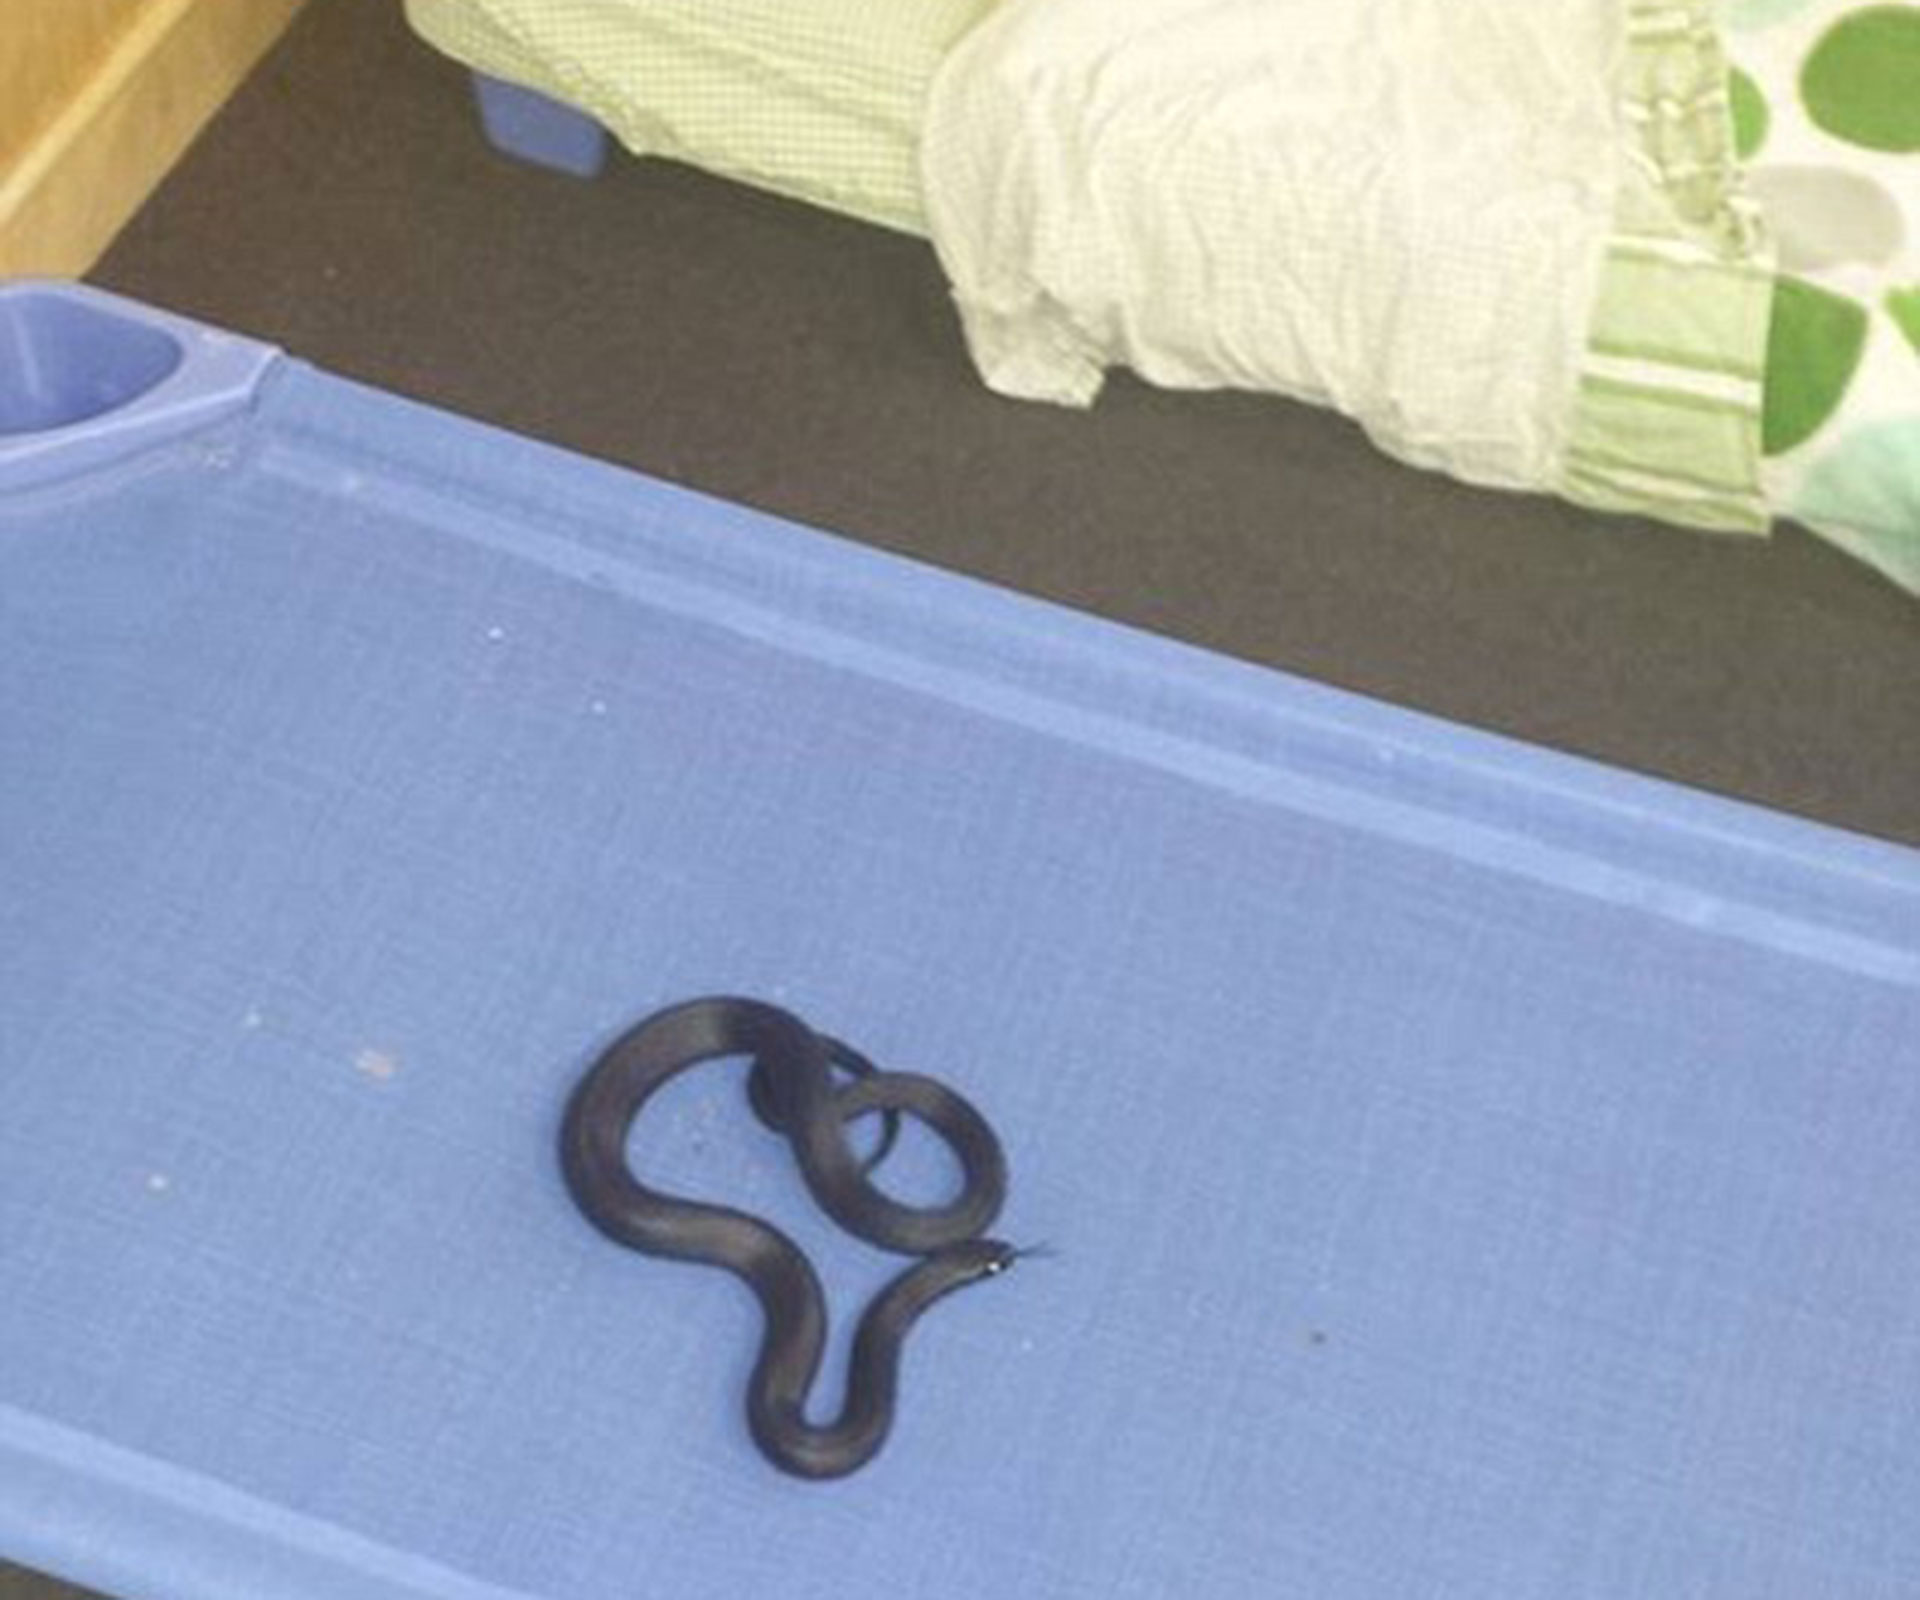 Snake found in Victorian childcare centre cot